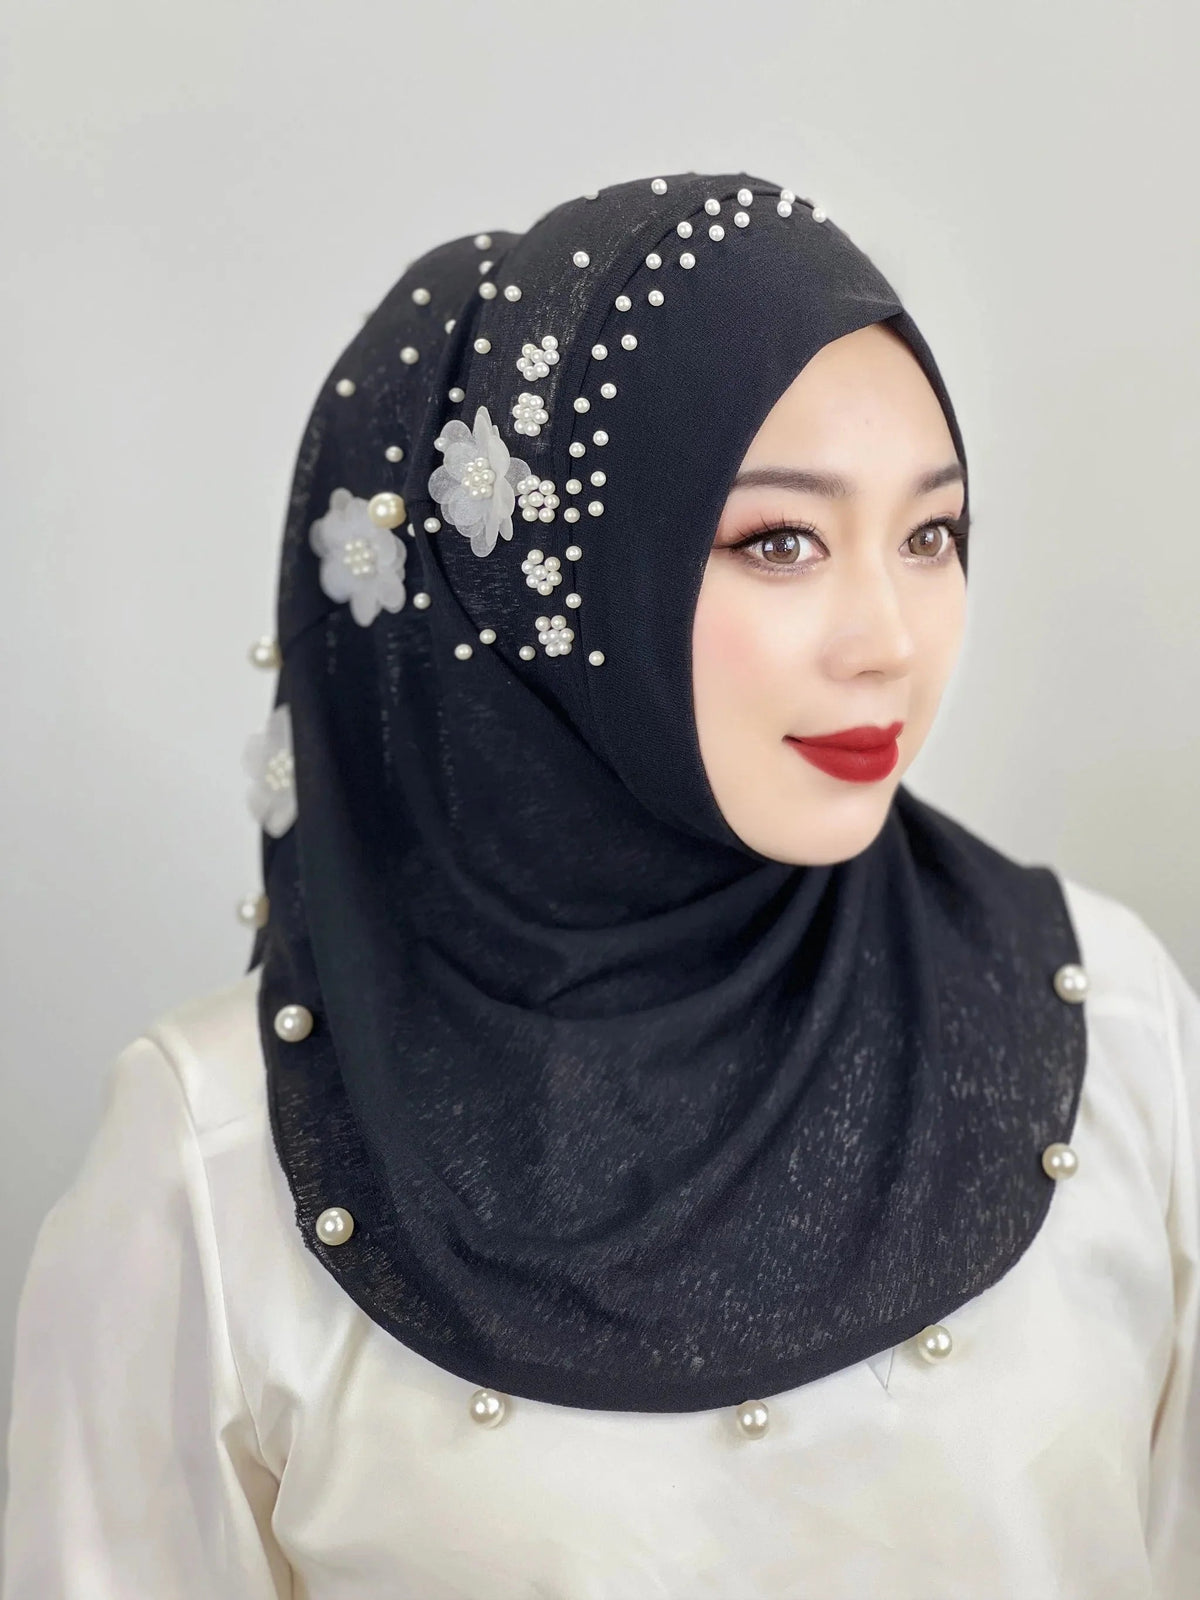 On sale - Muslim Beaded Hijab - 7 Colours - Free shipping -